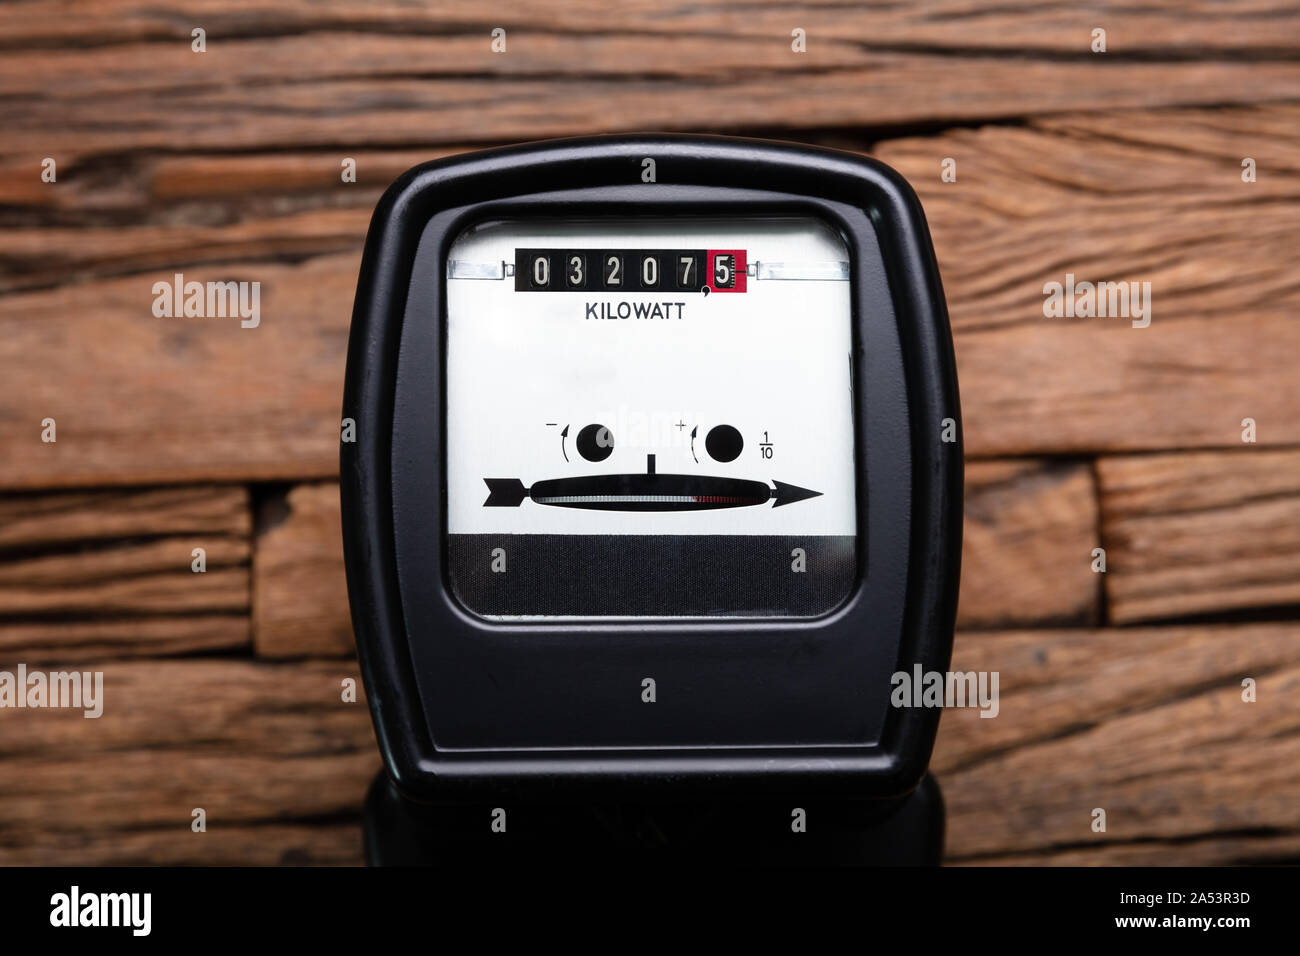 Close-up Of A Kilowatt Electricity Meter On Wooden Desk Stock Photo